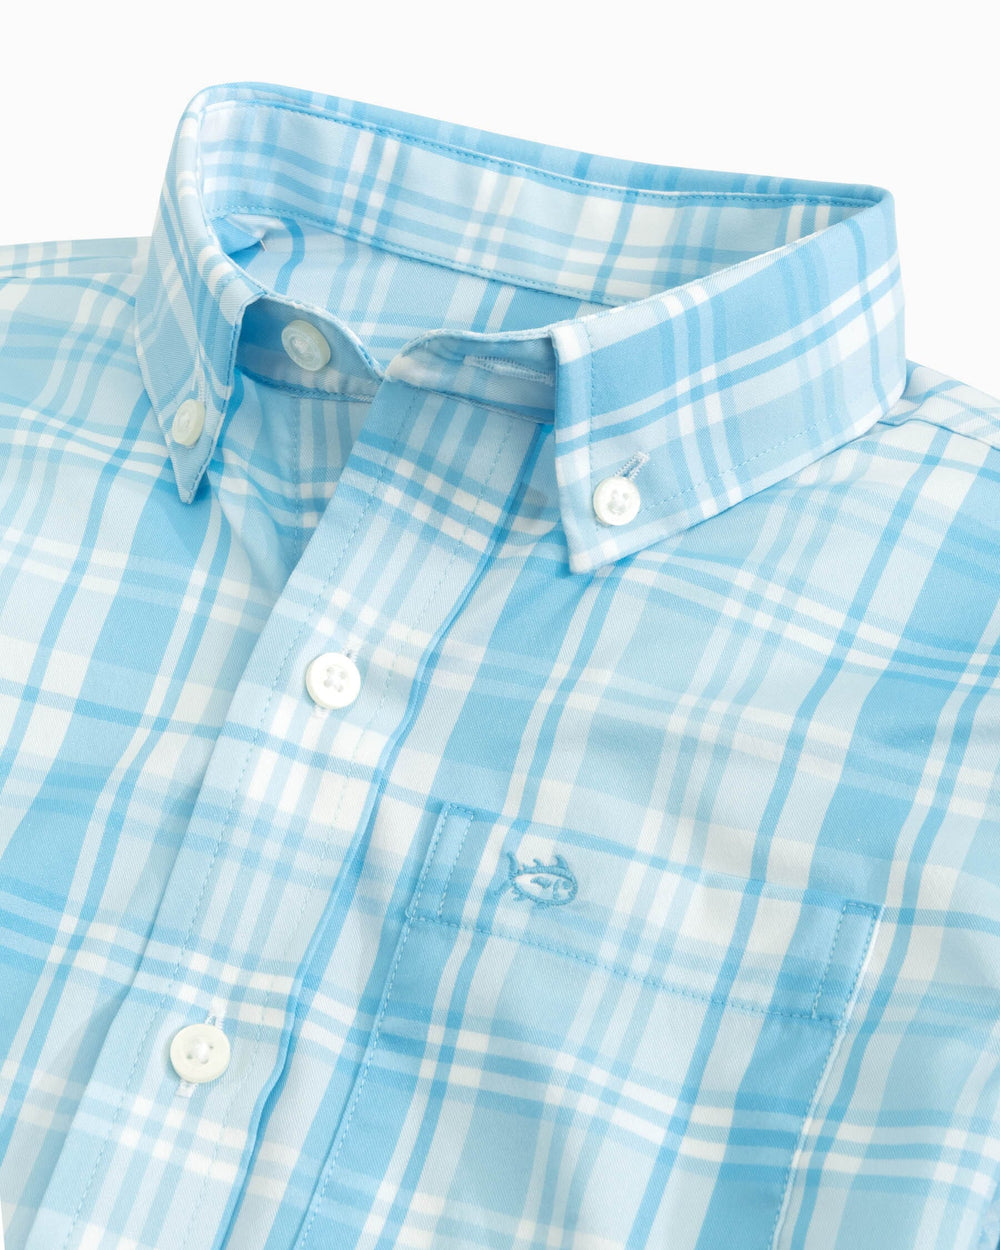 The detail view of the Southern Tide Youth Palm Canyon Plaid Intercoastal Sport Shirt by Southern Tide - Rain Water